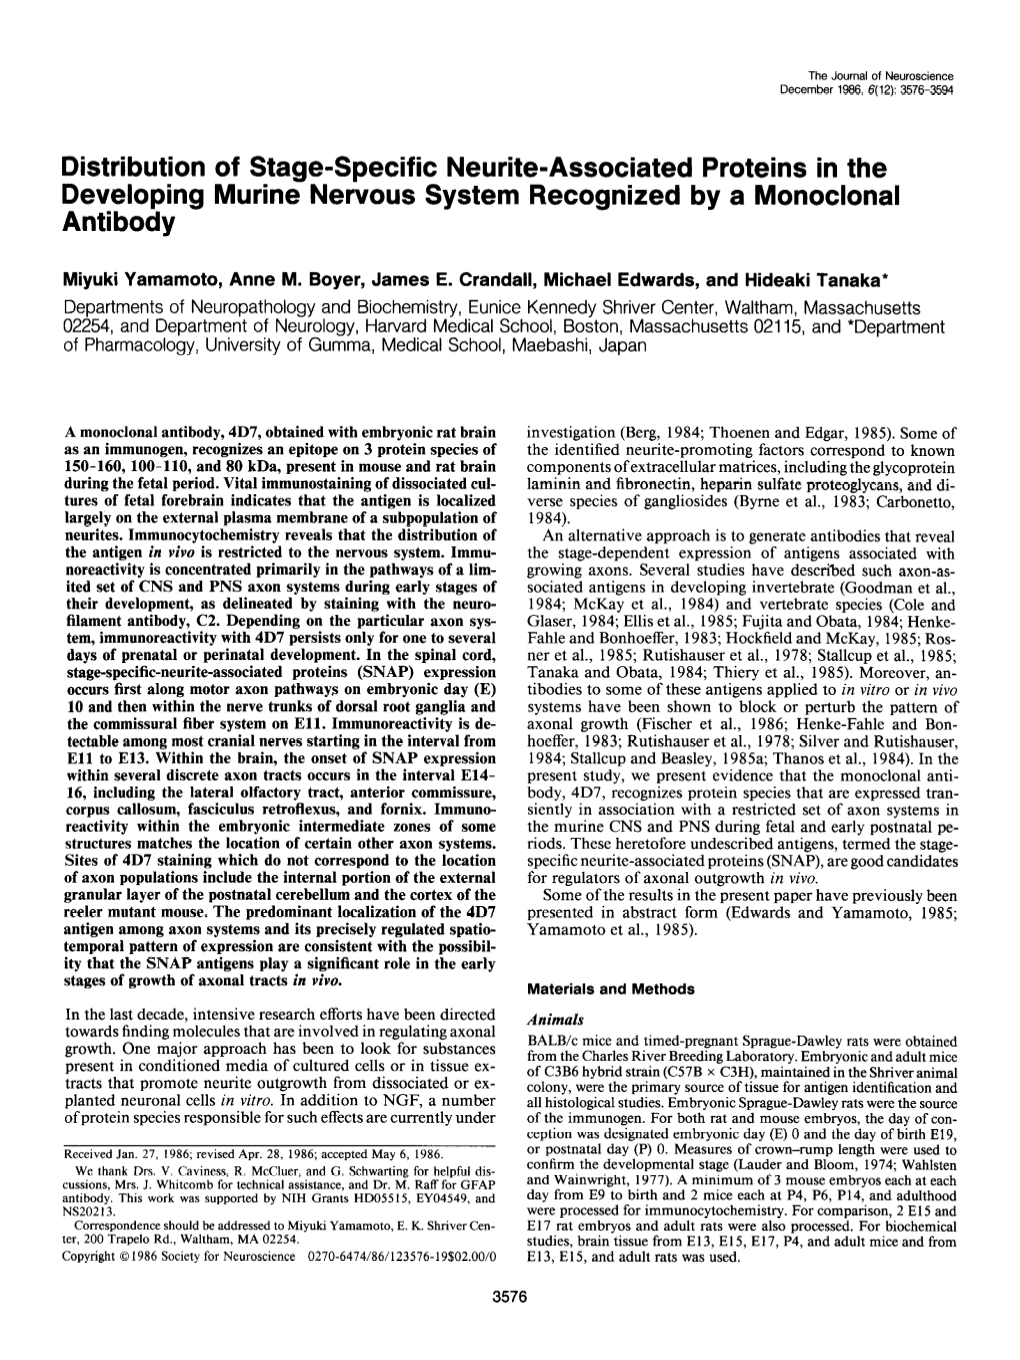 Distribution of Stage-Specific Neurite-Associated Proteins in the Developing Murine Nervous System Recognized by a Monoclonal Antibody